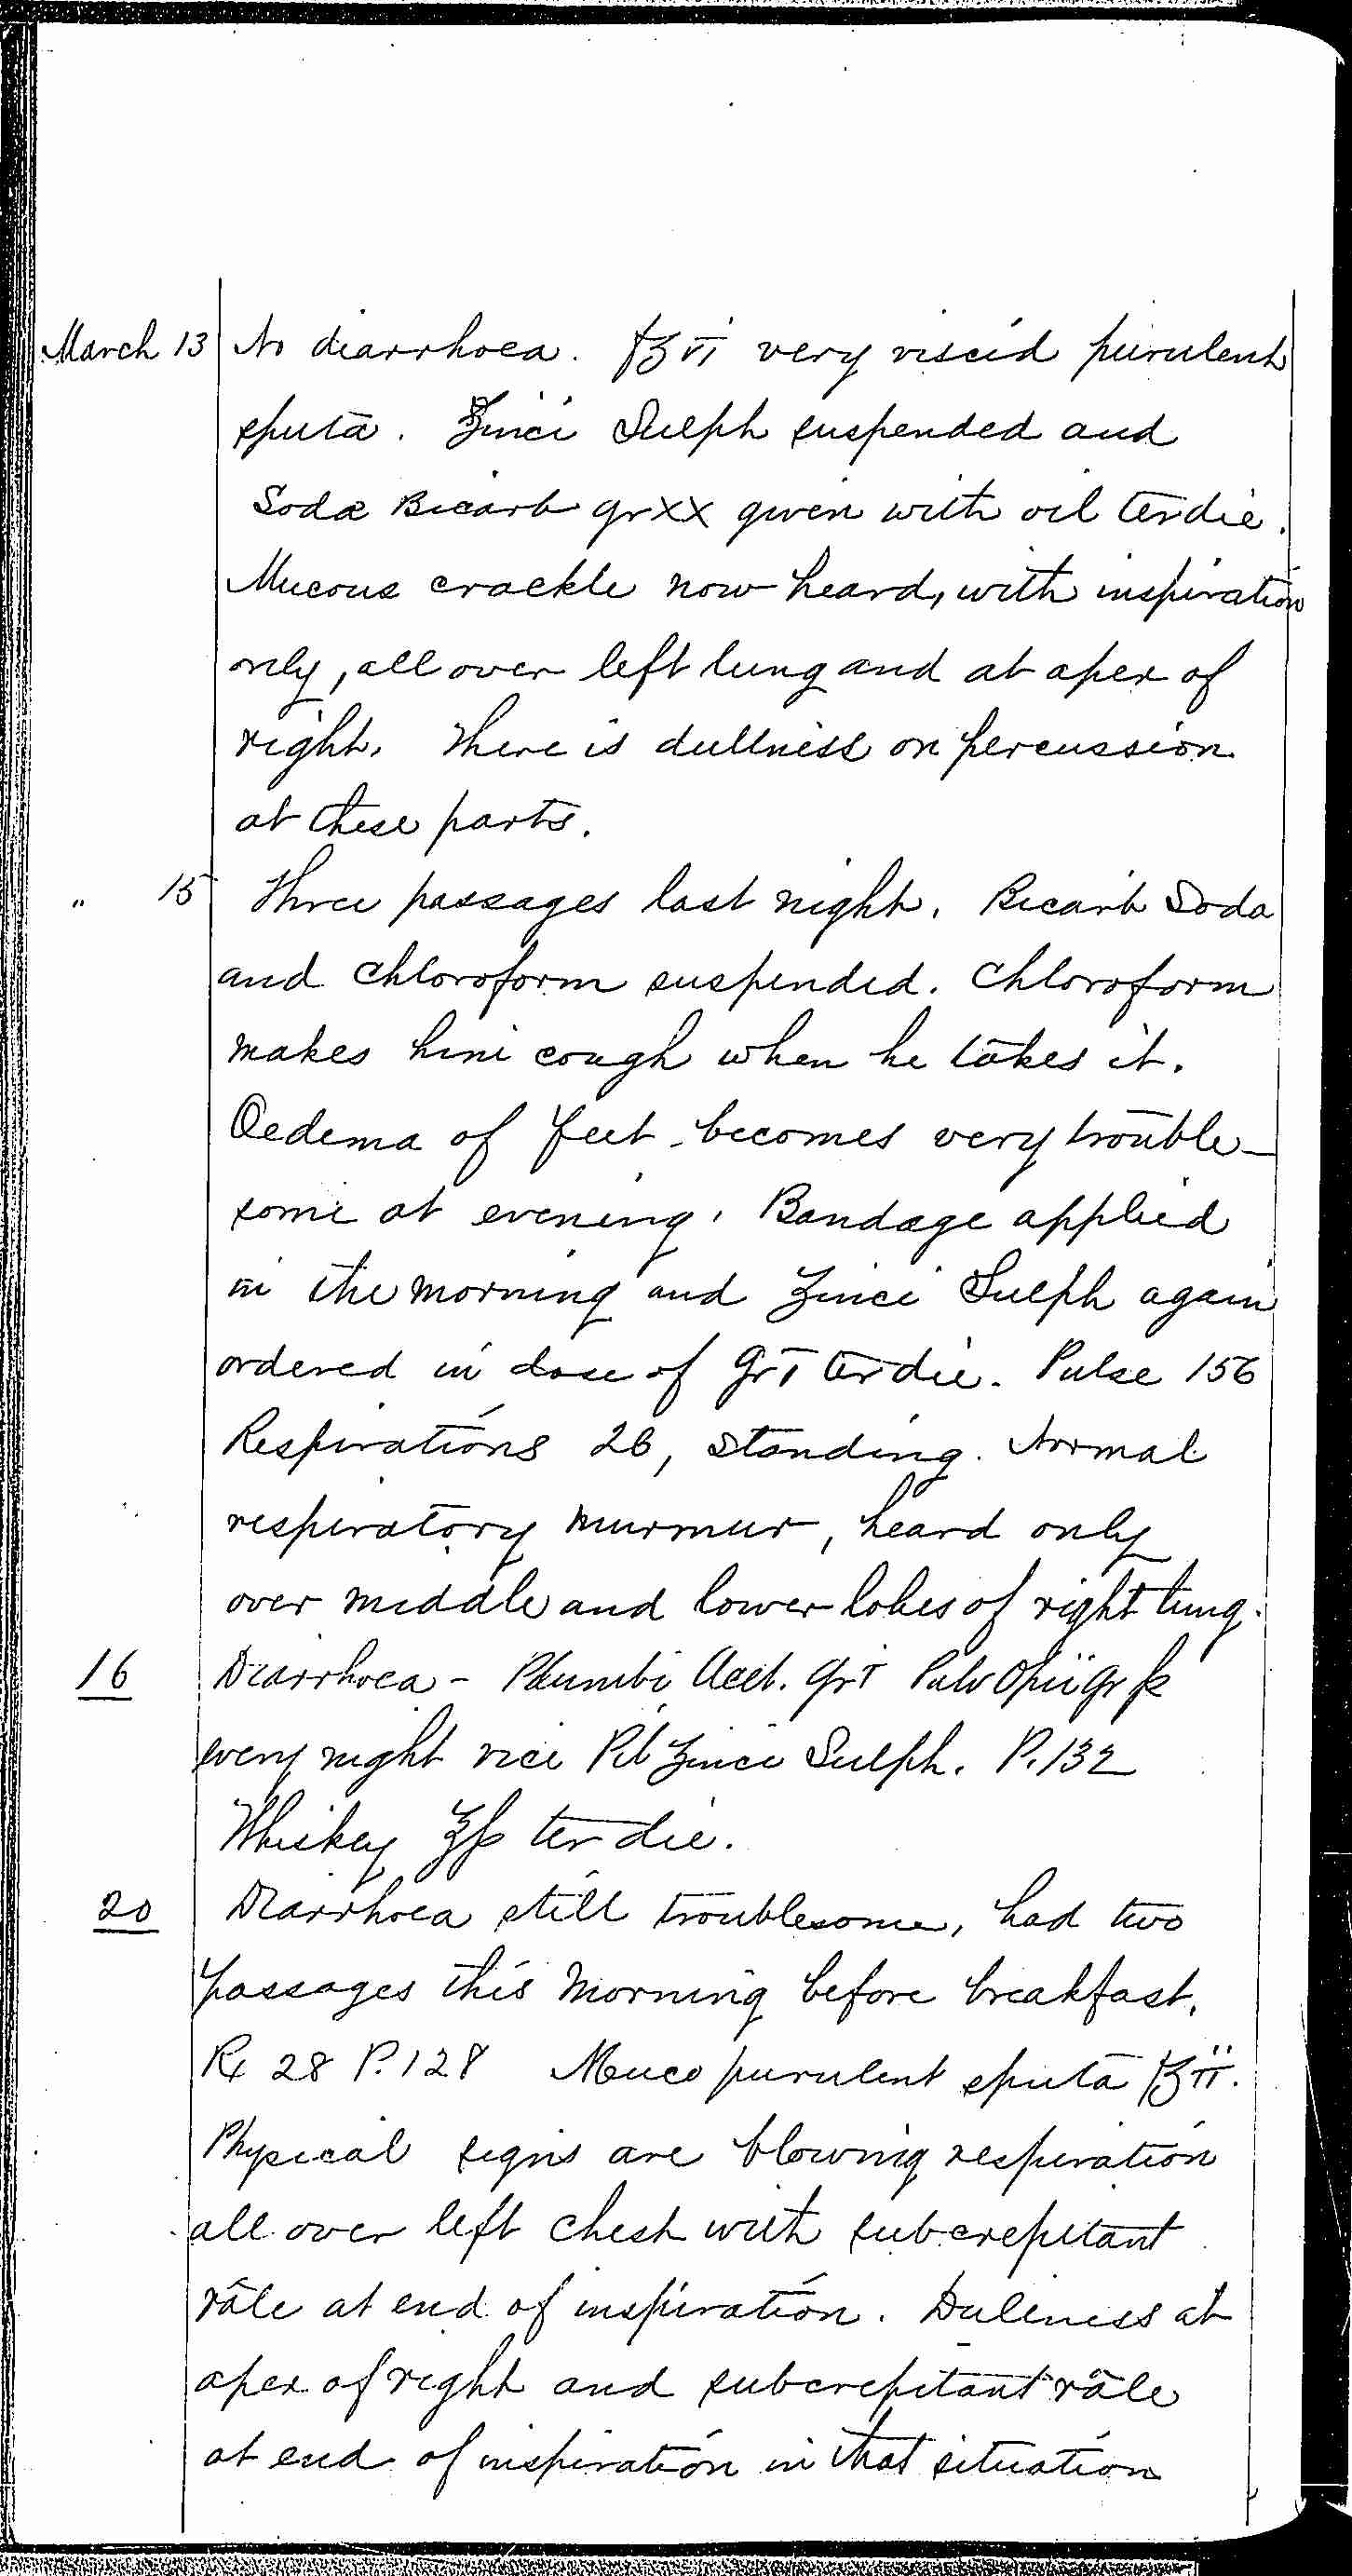 Entry for William Bathwell (page 10 of 13) in the log Hospital Tickets and Case Papers - Naval Hospital - Washington, D.C. - 1868-69